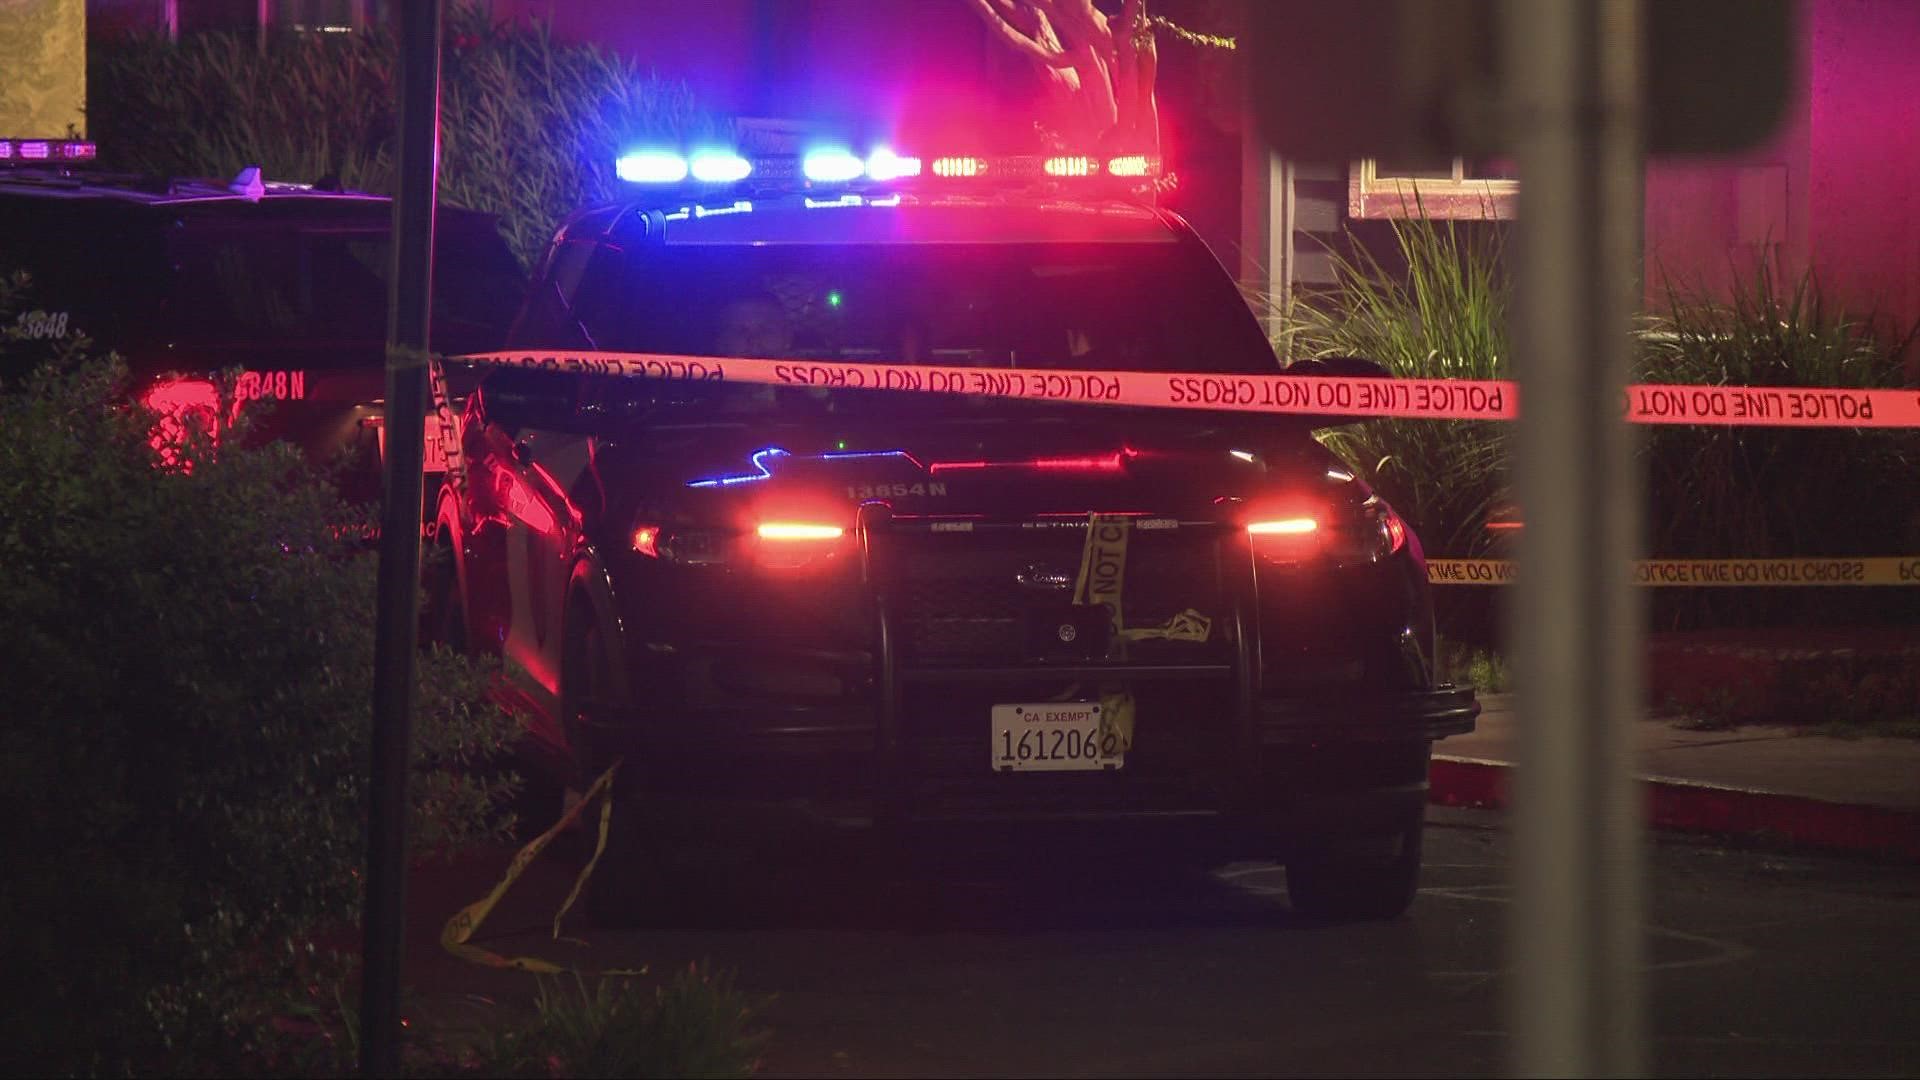 2 men died in a car at Woodbridge Apartments near South Natomas while another died in a separate shooting near Del Paso Heights.